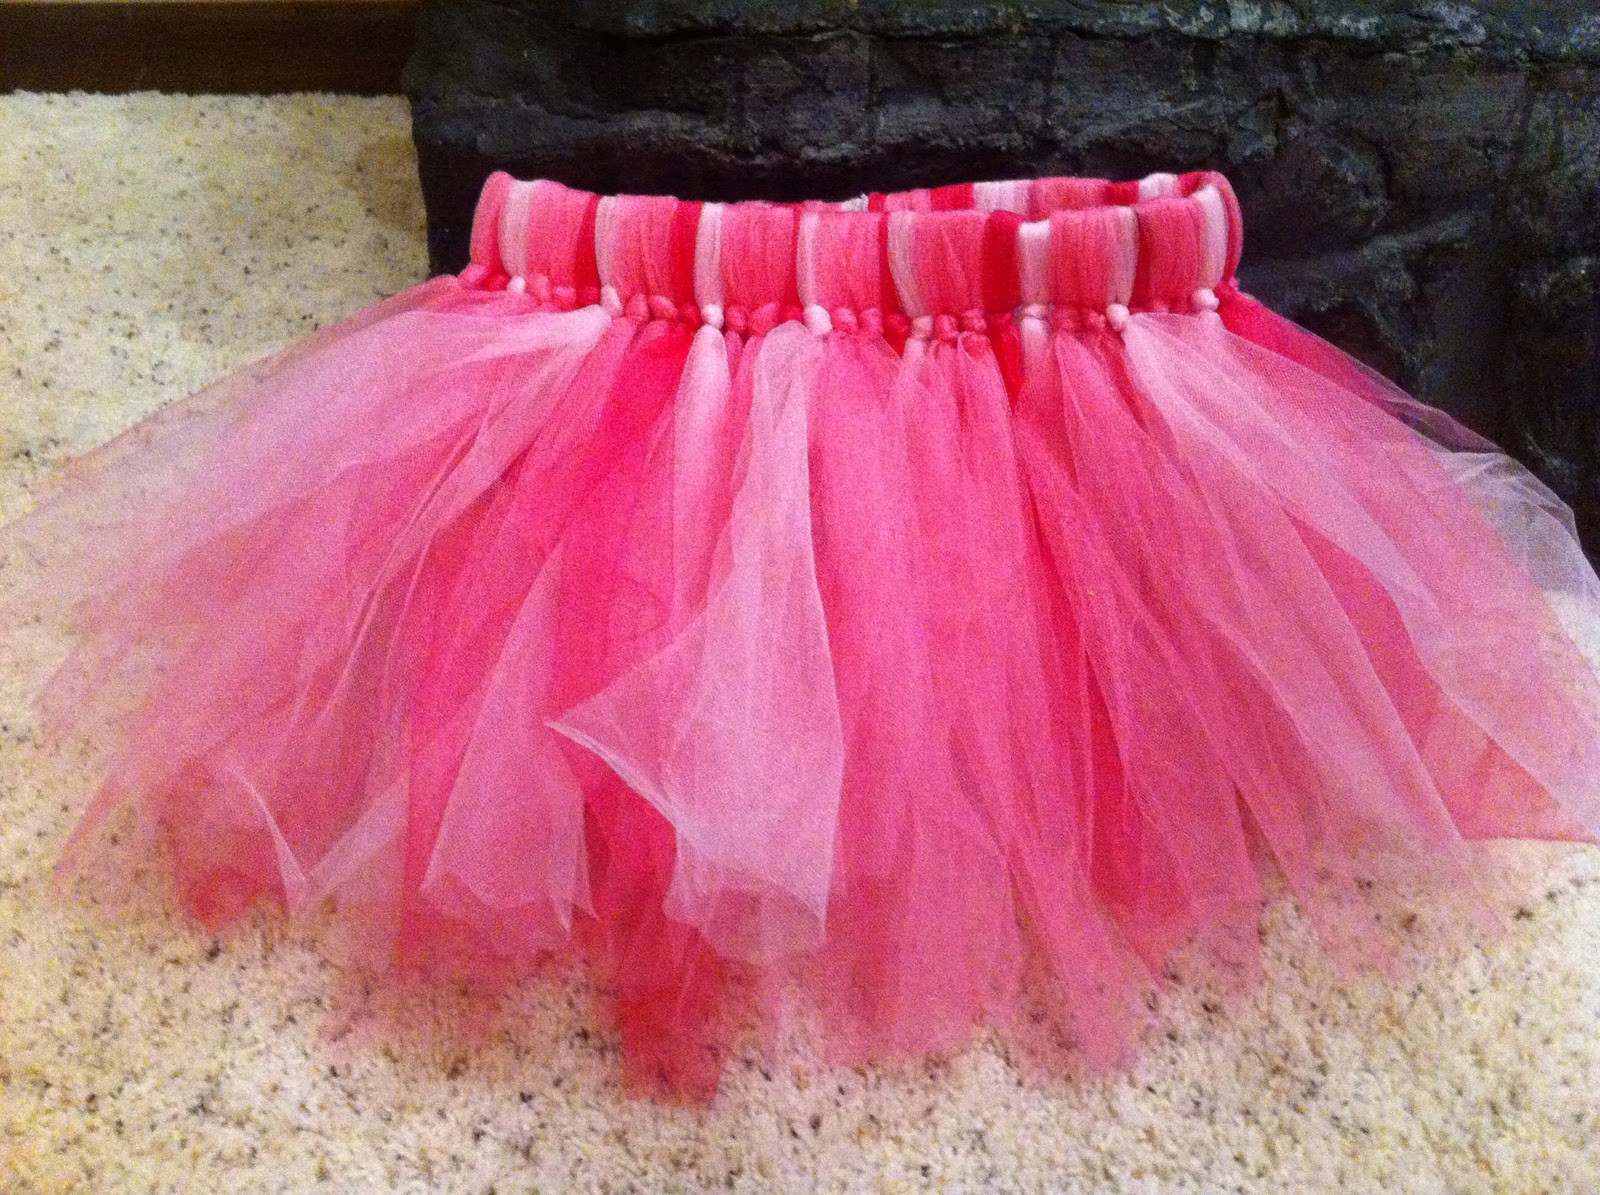 Toddler Tutu DIY
 DIY Valentine s Day Projects Handmade Tulle Skirt for $7